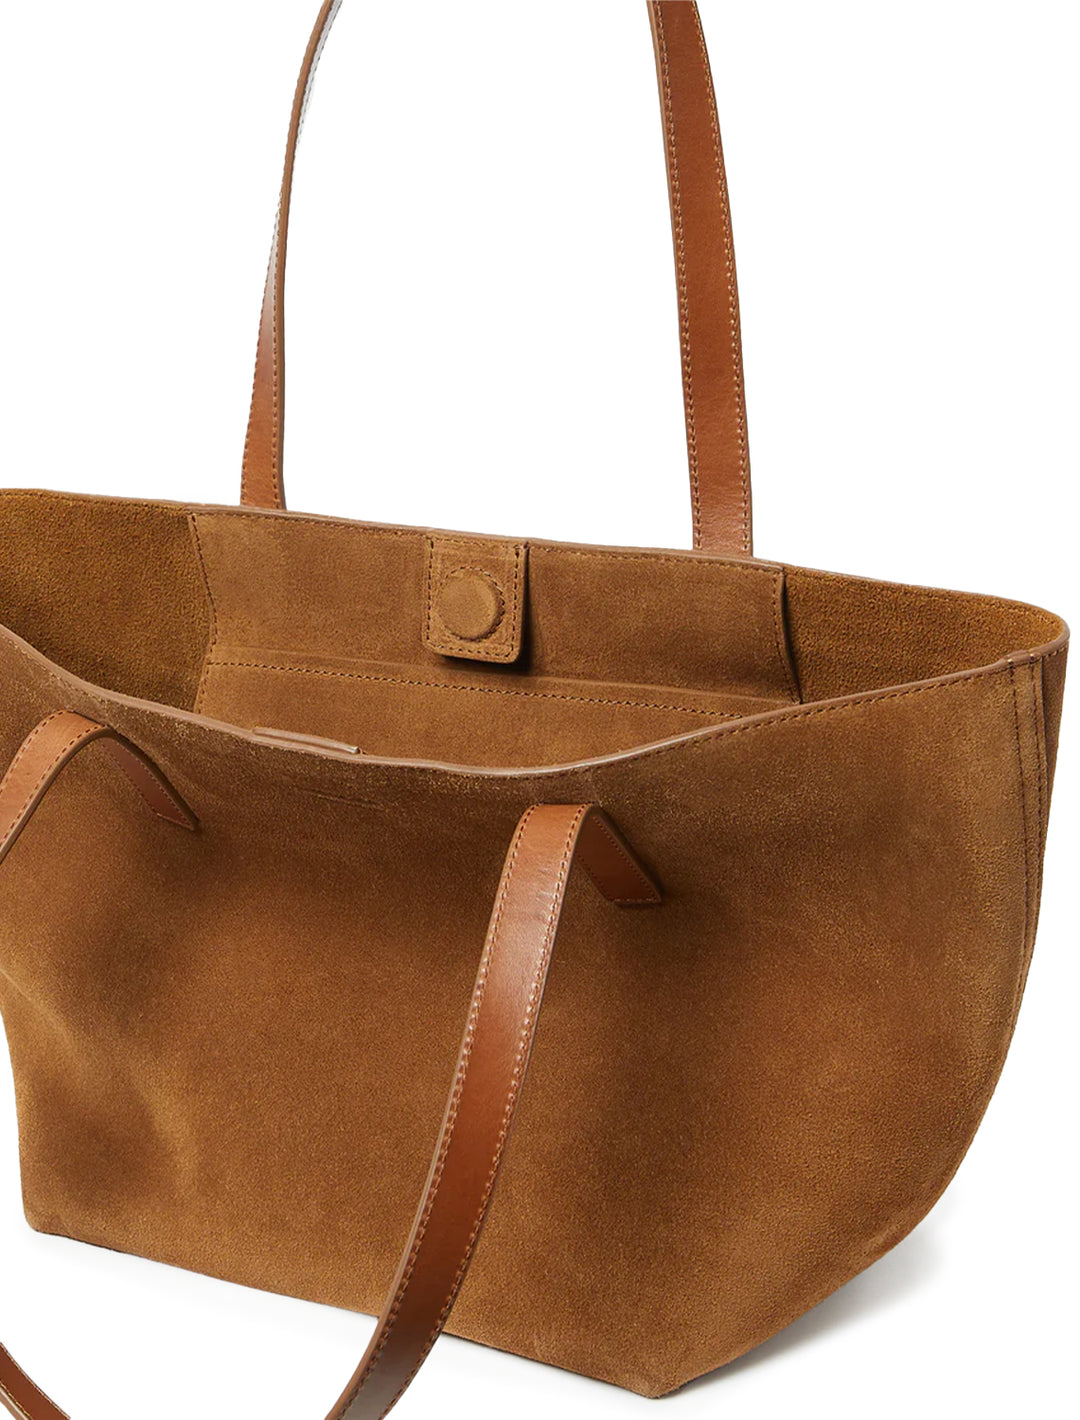 Inside view of Loeffler Randall's easton medium tote in cacao.